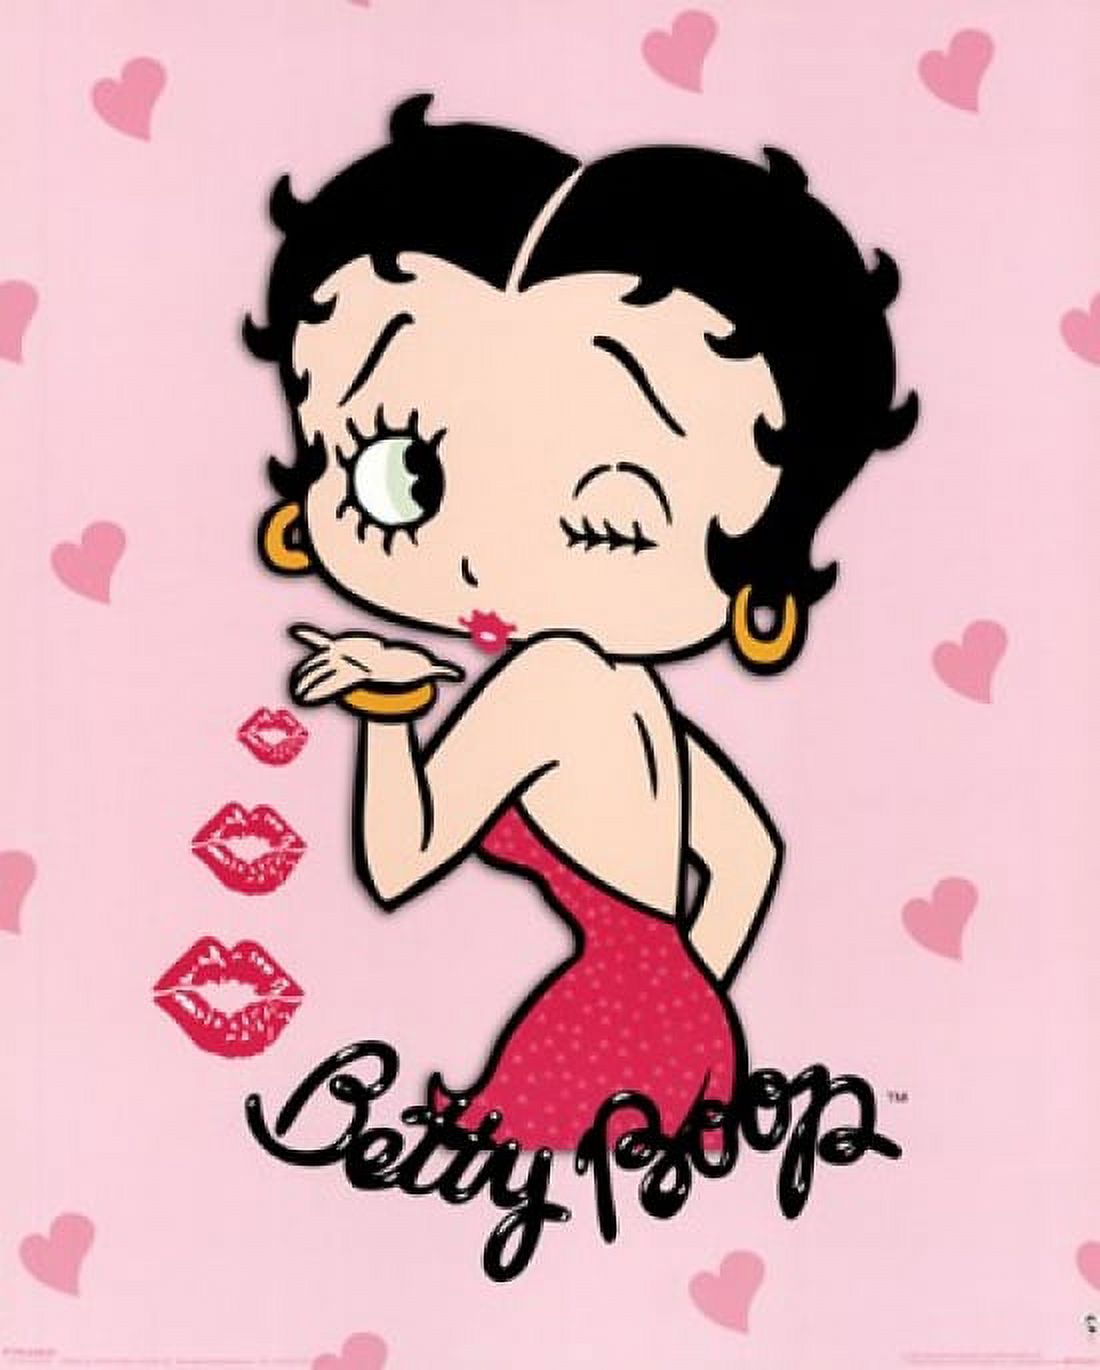 Betty Boop - Pink Kiss Poster (16 x 20) - image 1 of 1